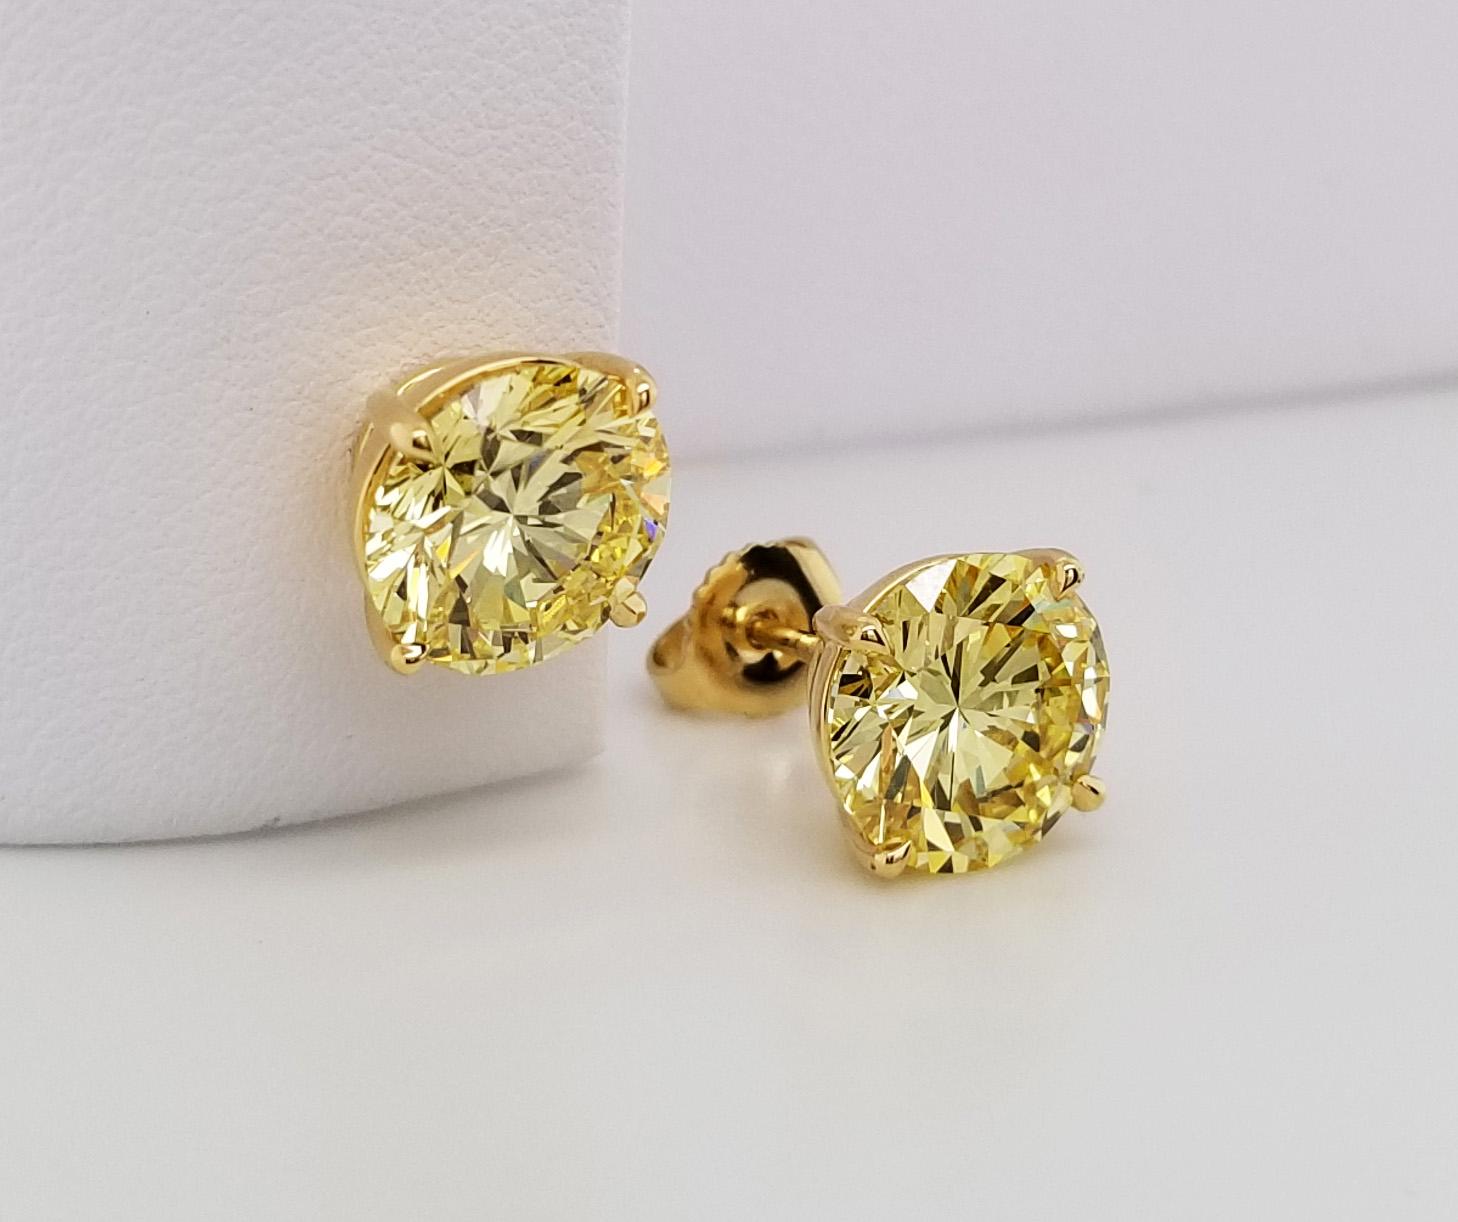 Matching pair of 3-carat, natural fancy intense yellow round diamond stud earrings on 18k yellow gold. GIA-certified stud earrings with VS1 and VVS2 fancy intense yellow diamonds from Scarselli.

A new classic to add to your jewelry capsule